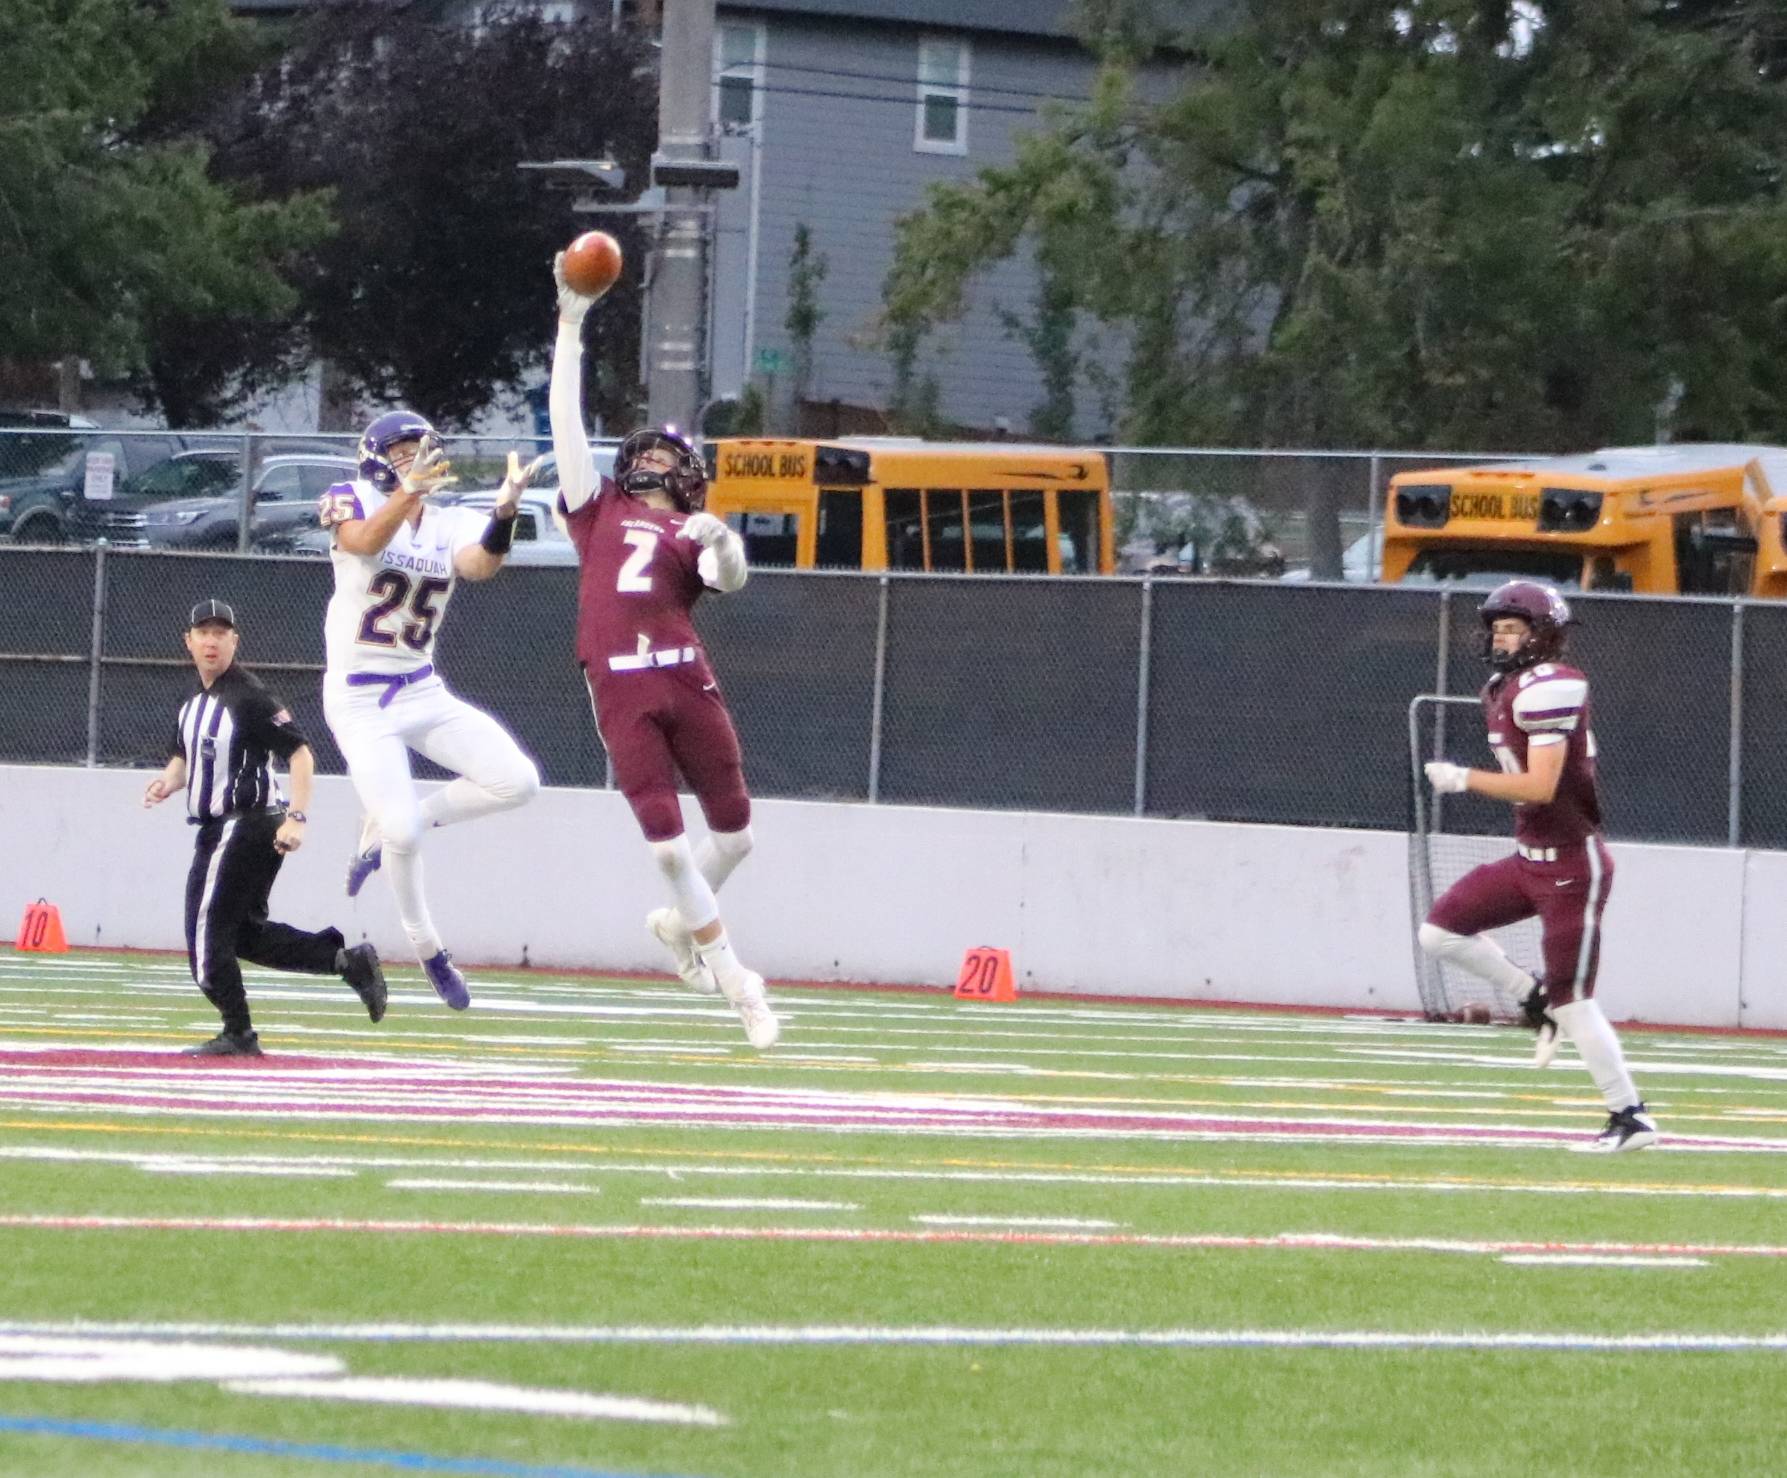 Islanders defensive back Ethan Boyle makes a one-handed interception in the first quarter of their 12-3 loss to Issaquah. Benjamin Olson/ staff photo